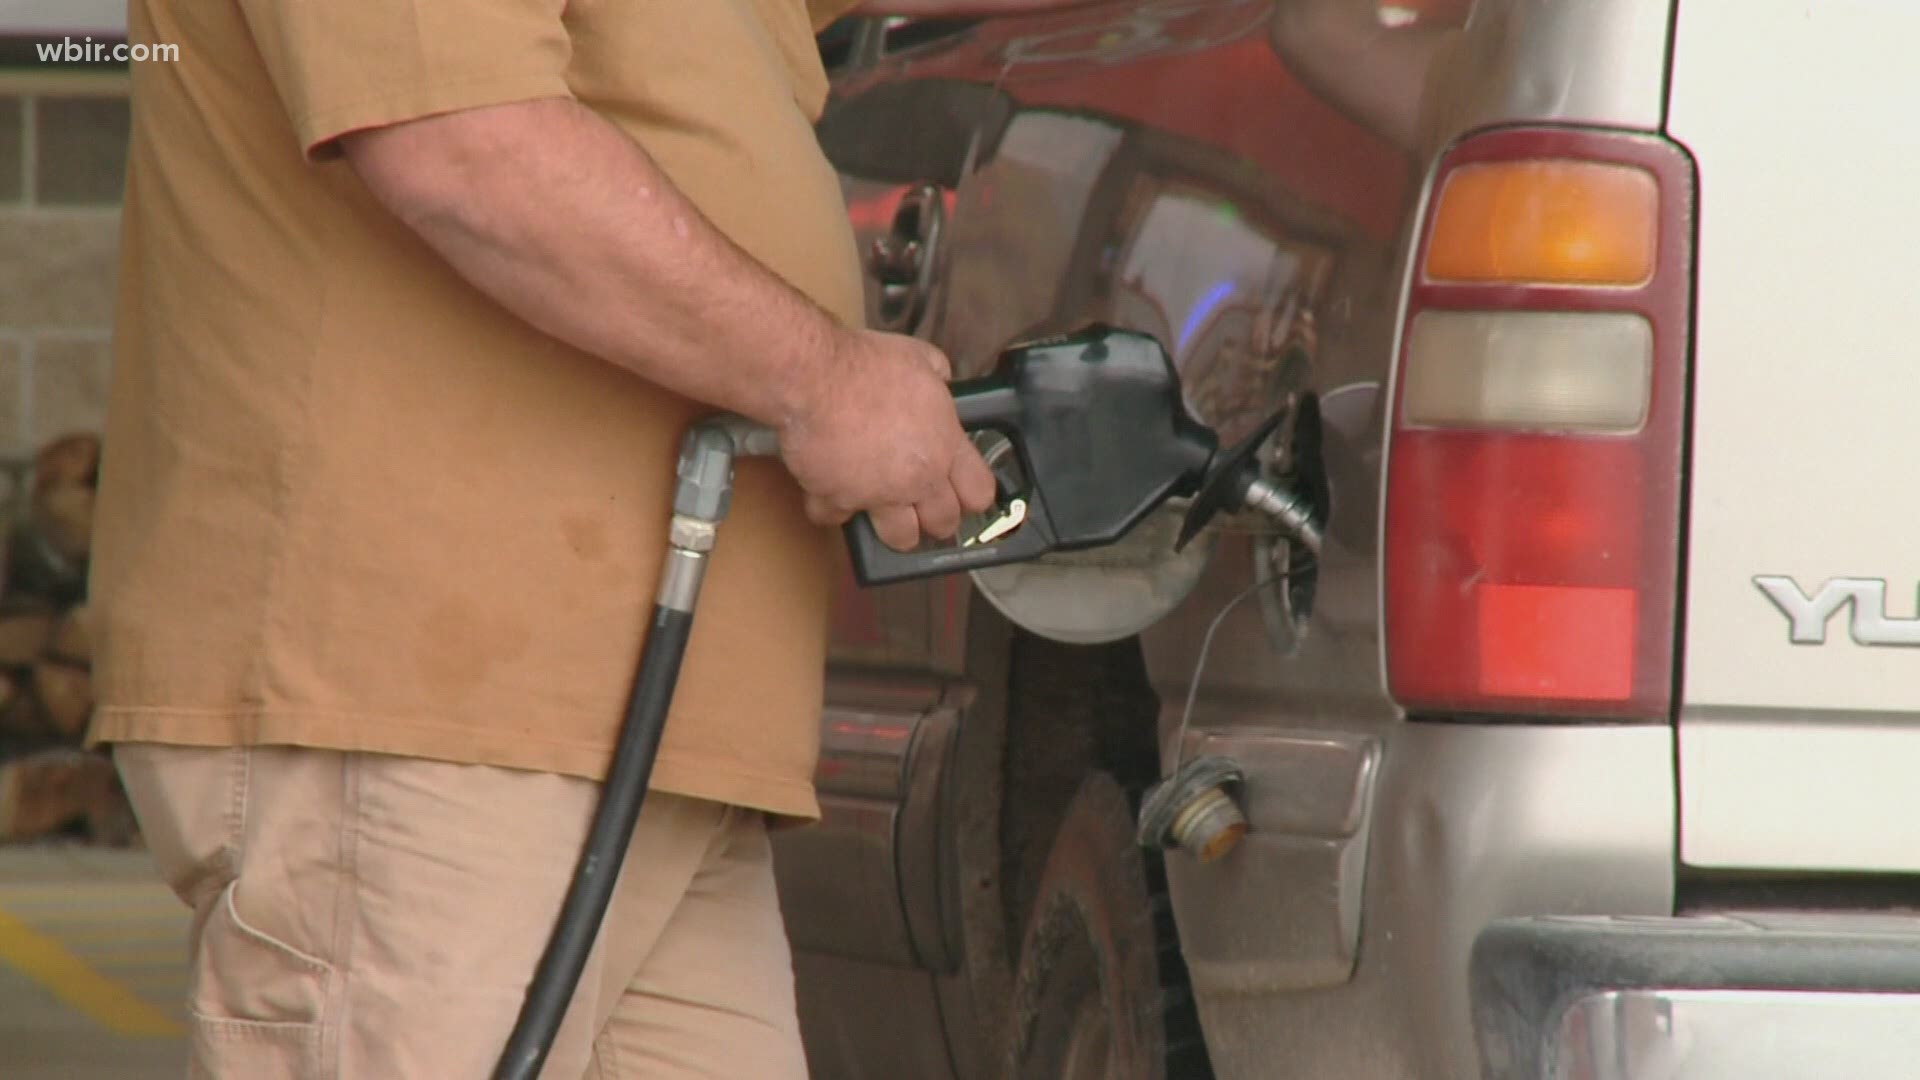 Many drivers who used to work in fuel delivery found other jobs in 2020, according to officials.